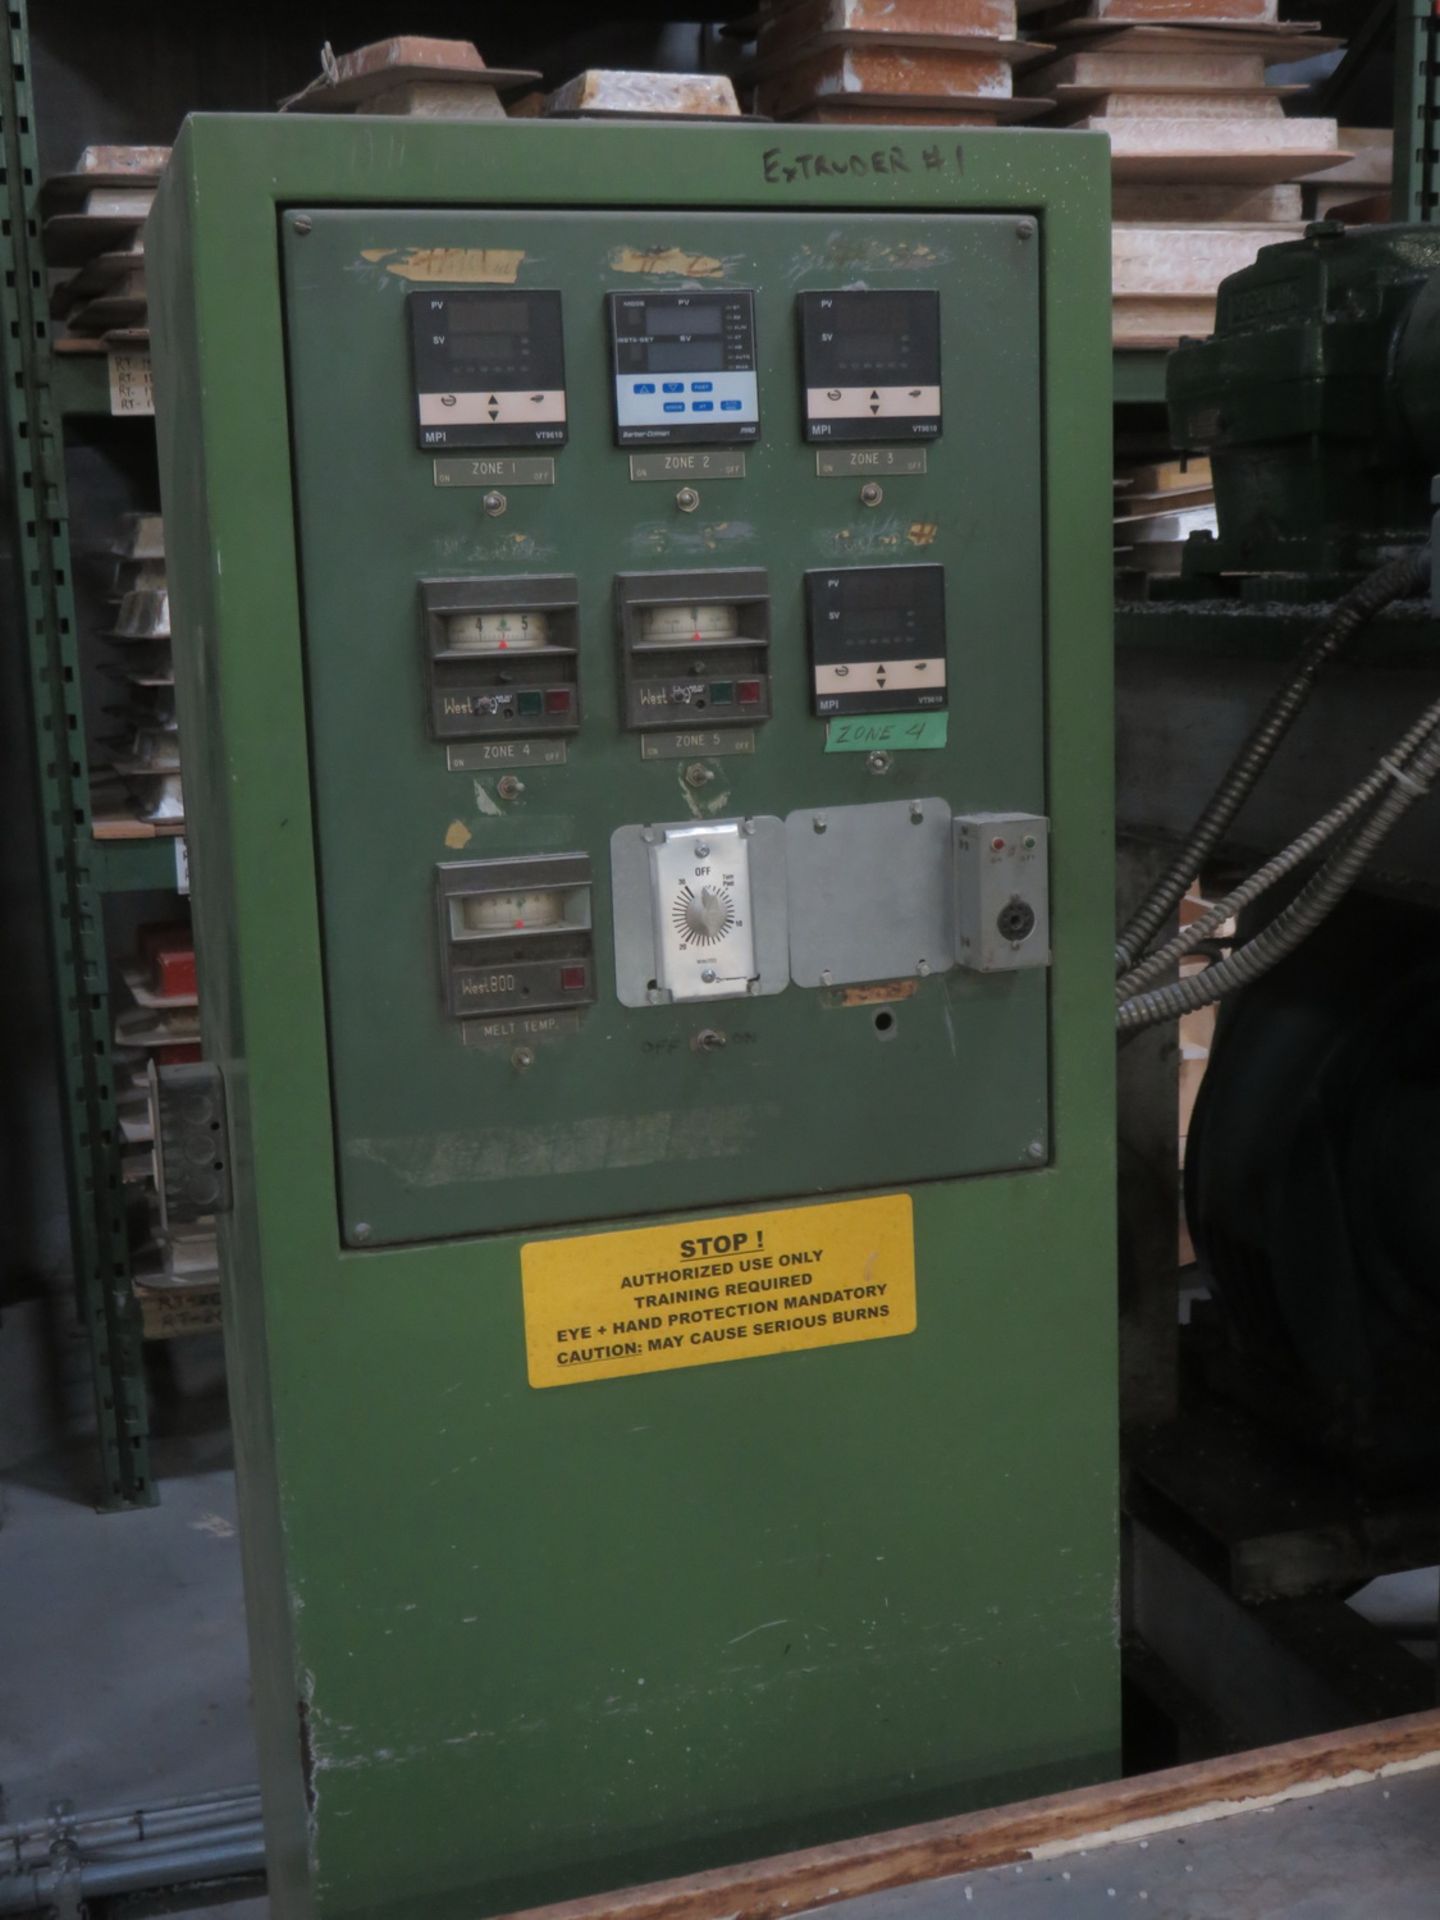 STERLING 2 1/2 X 24-1 PLASTIC EXTRUDER C/W 30HP MOTOR & CONTROL PANEL, S/N 25518 - Image 2 of 4